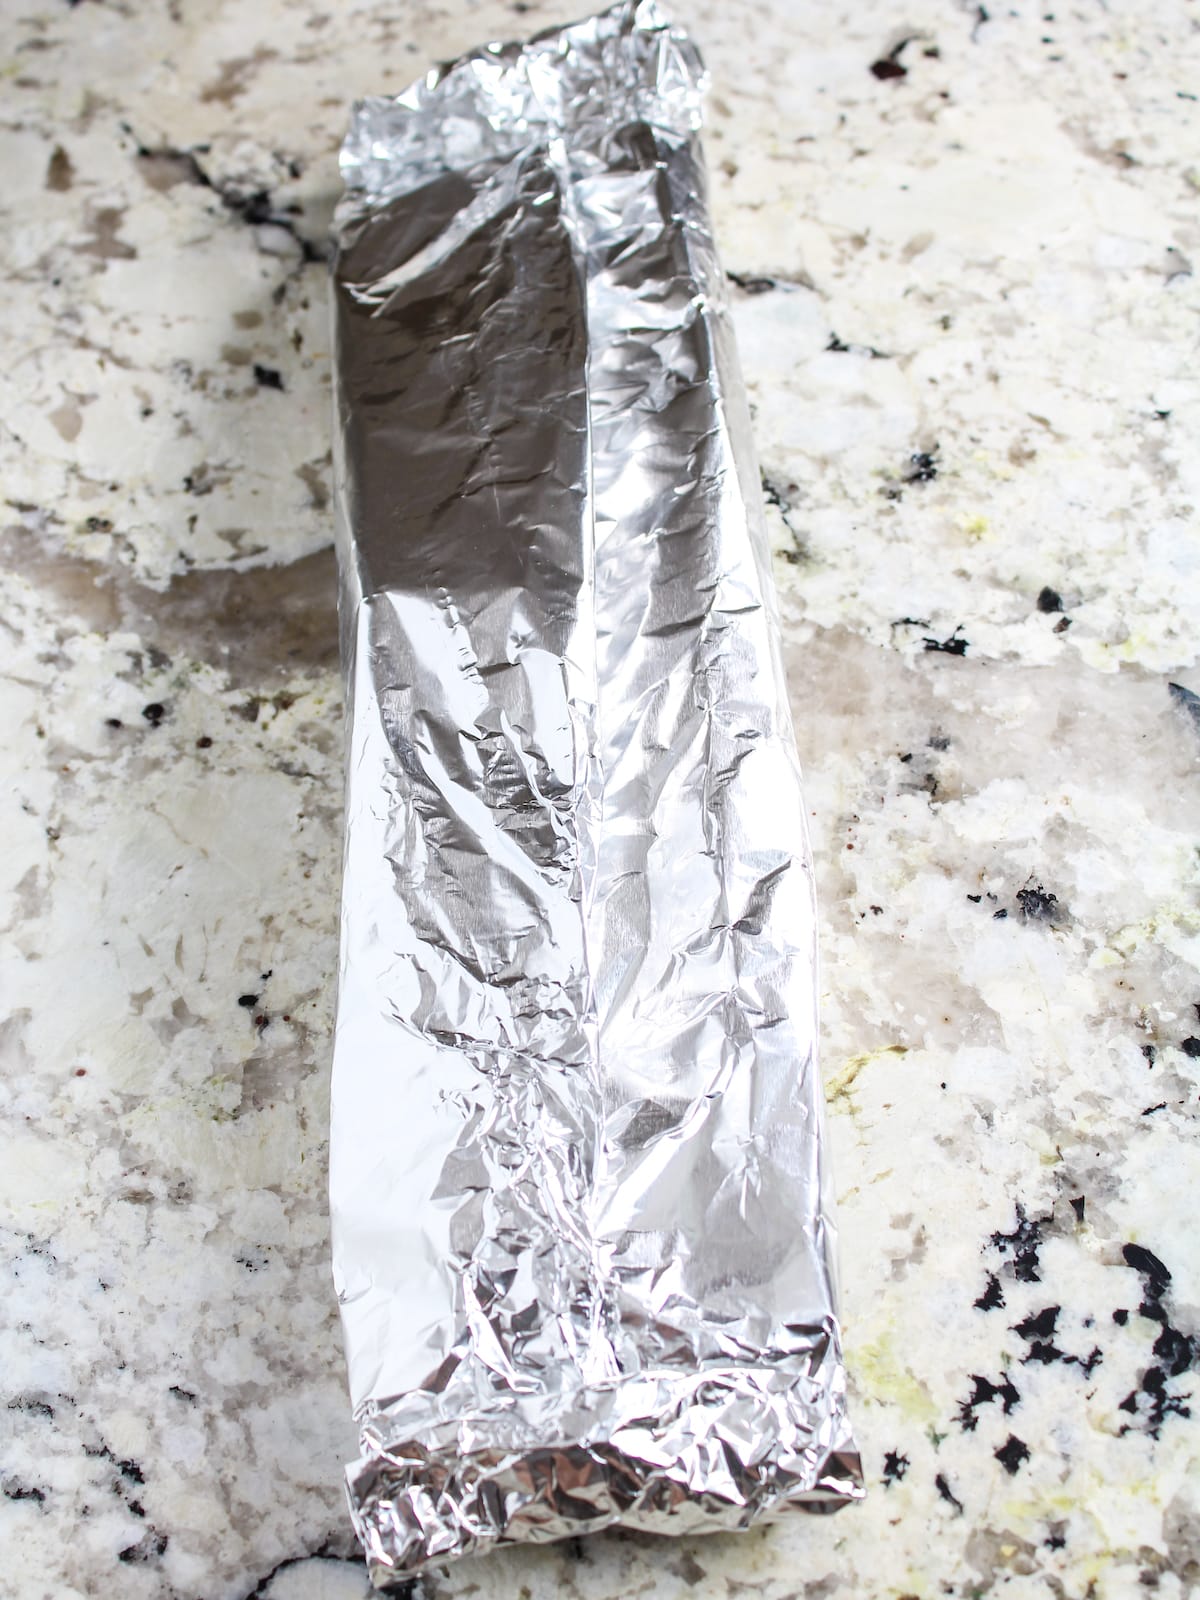 A foil packet with the ribs inside.